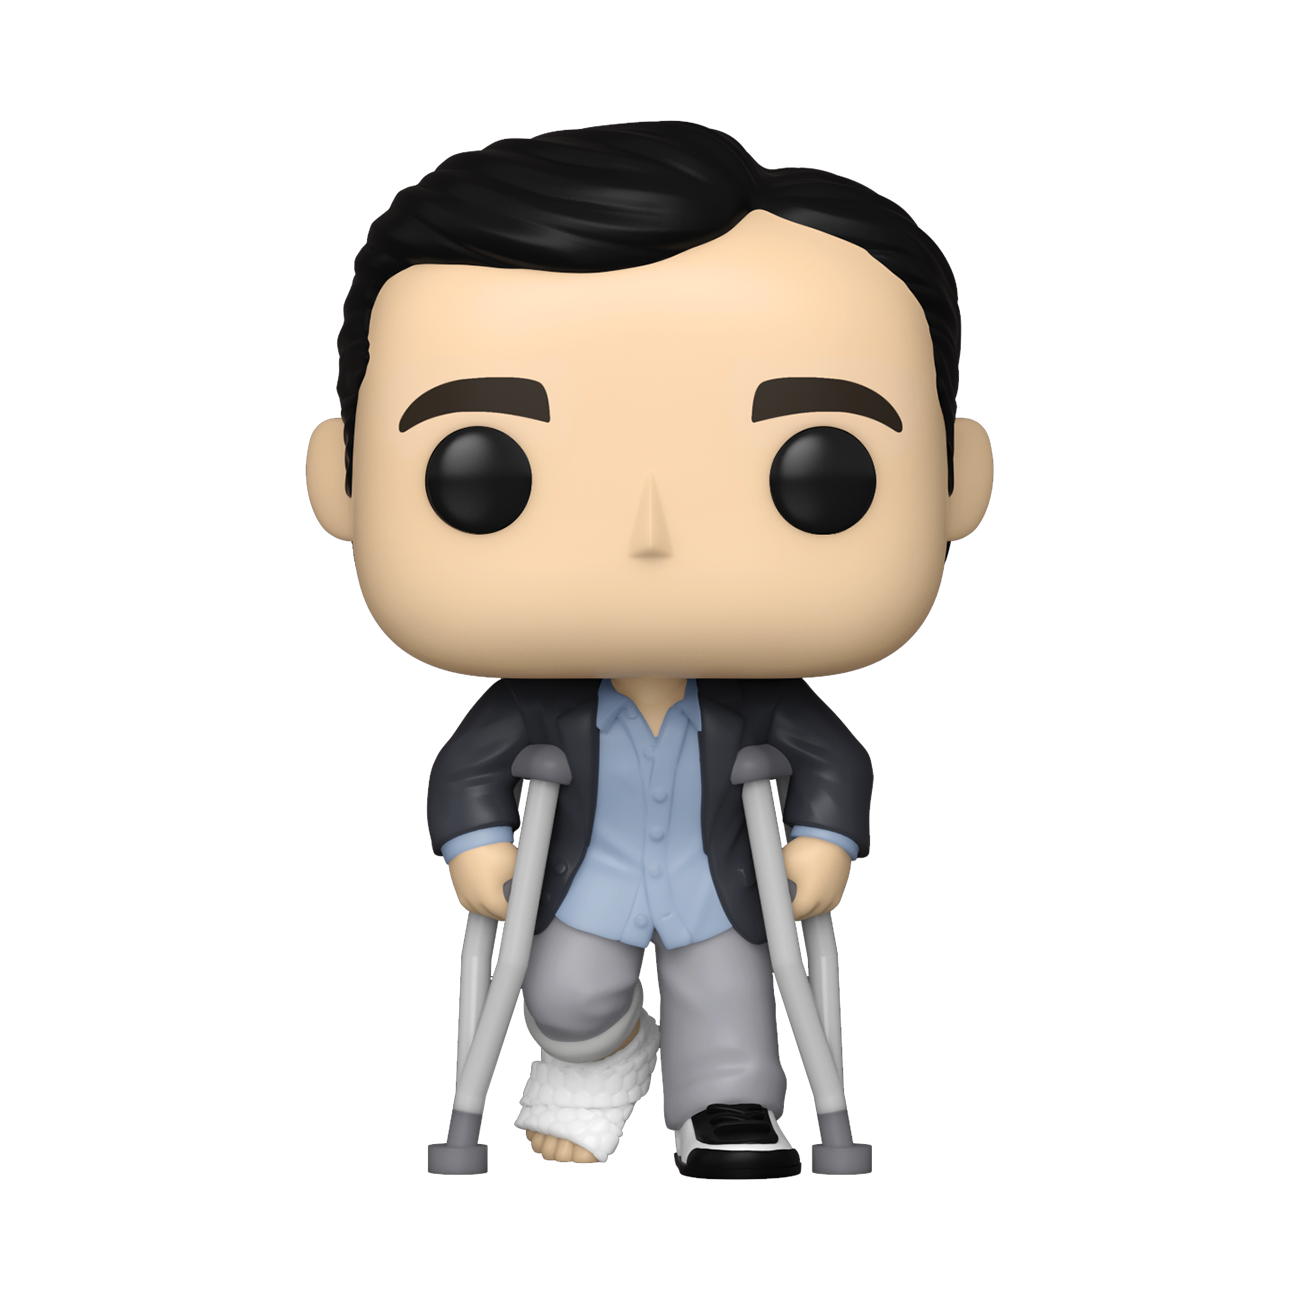 Funko Pop! TV: The Office - Michael Scott Standing with Crutches